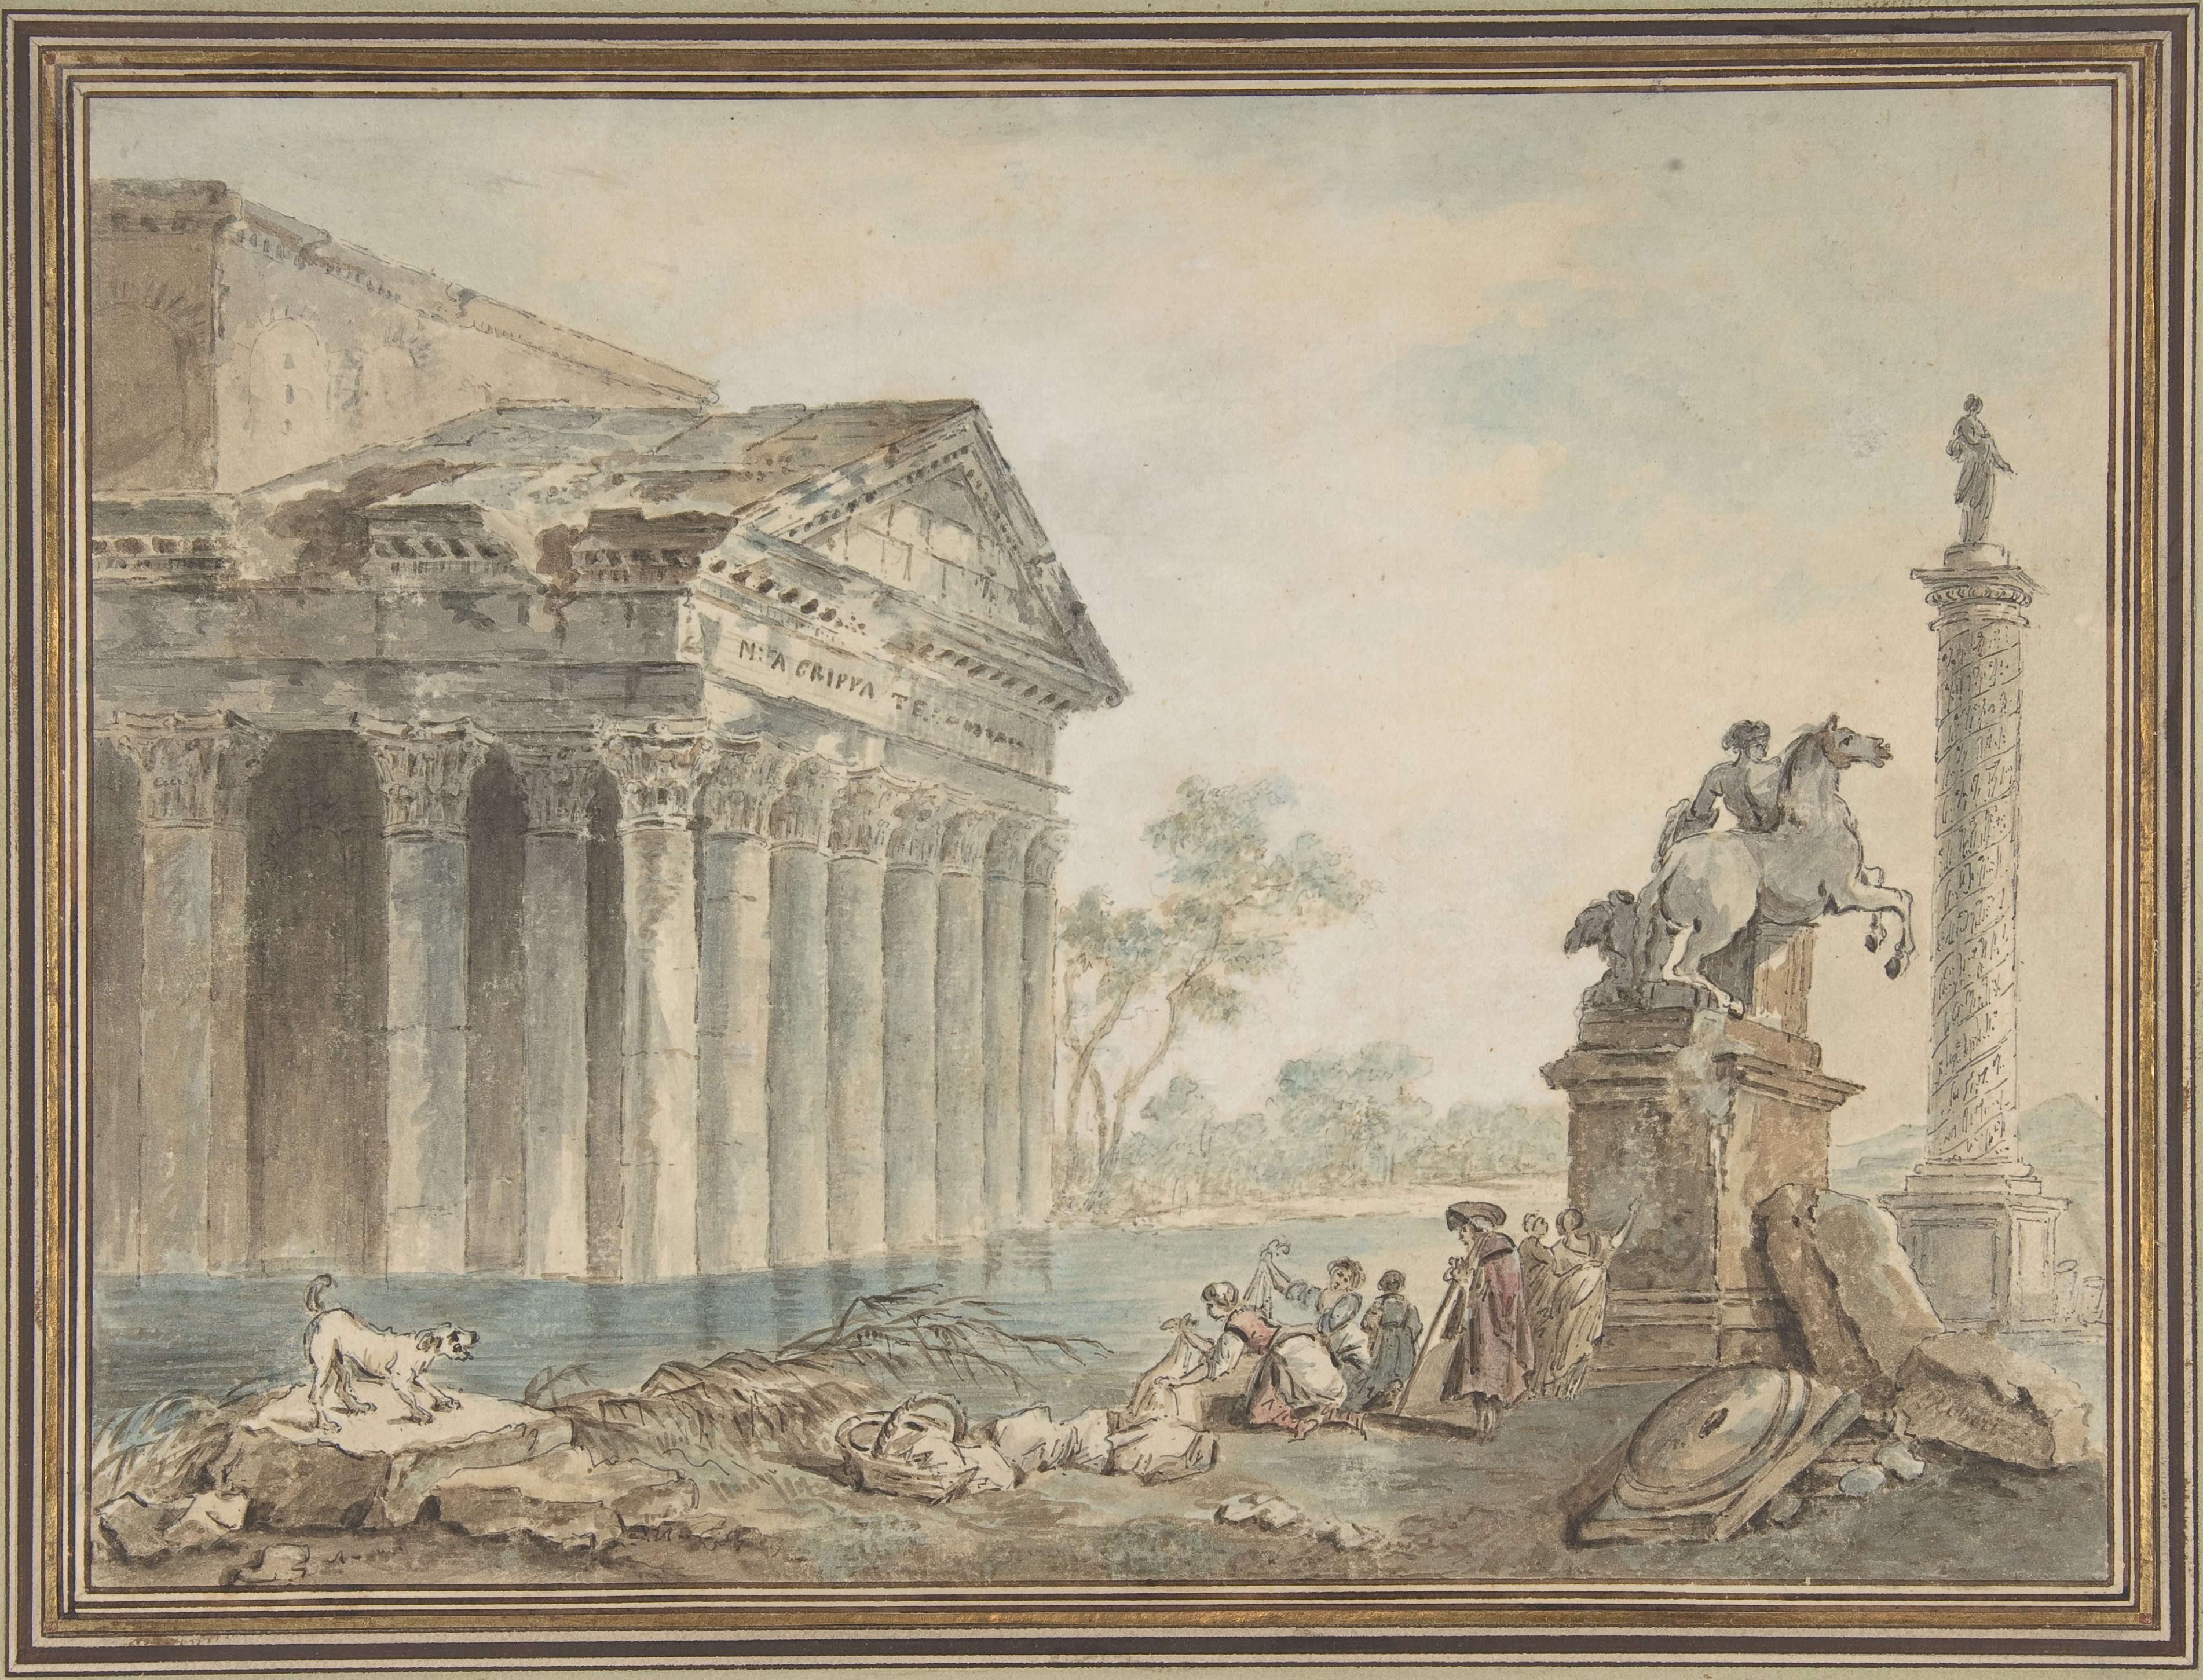 Architectural_Capriccio_with_Roman_Monuments_and_Washerwomen_MET_DP808080.jpg